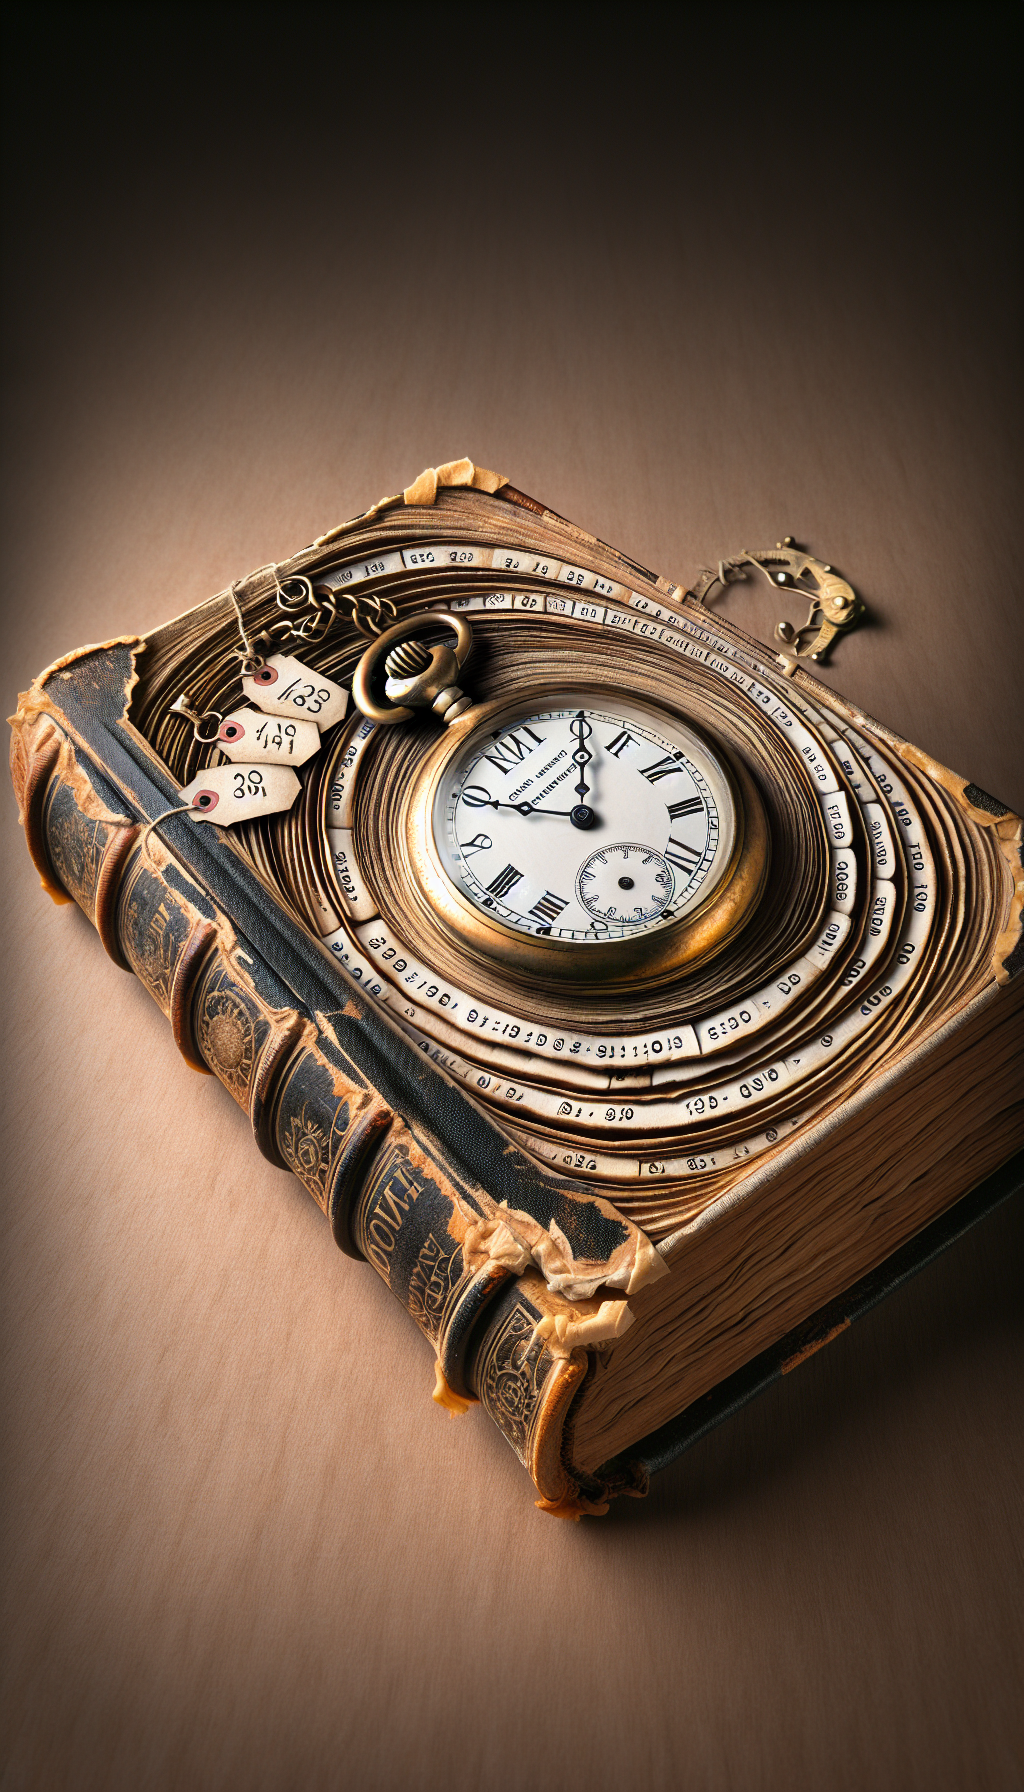 An antique pocket watch embedded in an ancient, weathered book cover, where each hour marks a significant historical era, reflecting the book's age and increasing value. The book's pages transition from crisp, white edges to a rich, golden patina, symbolizing knowledge and worth accumulated over time, while intertwined with faded price tags escalating with each passing hour.